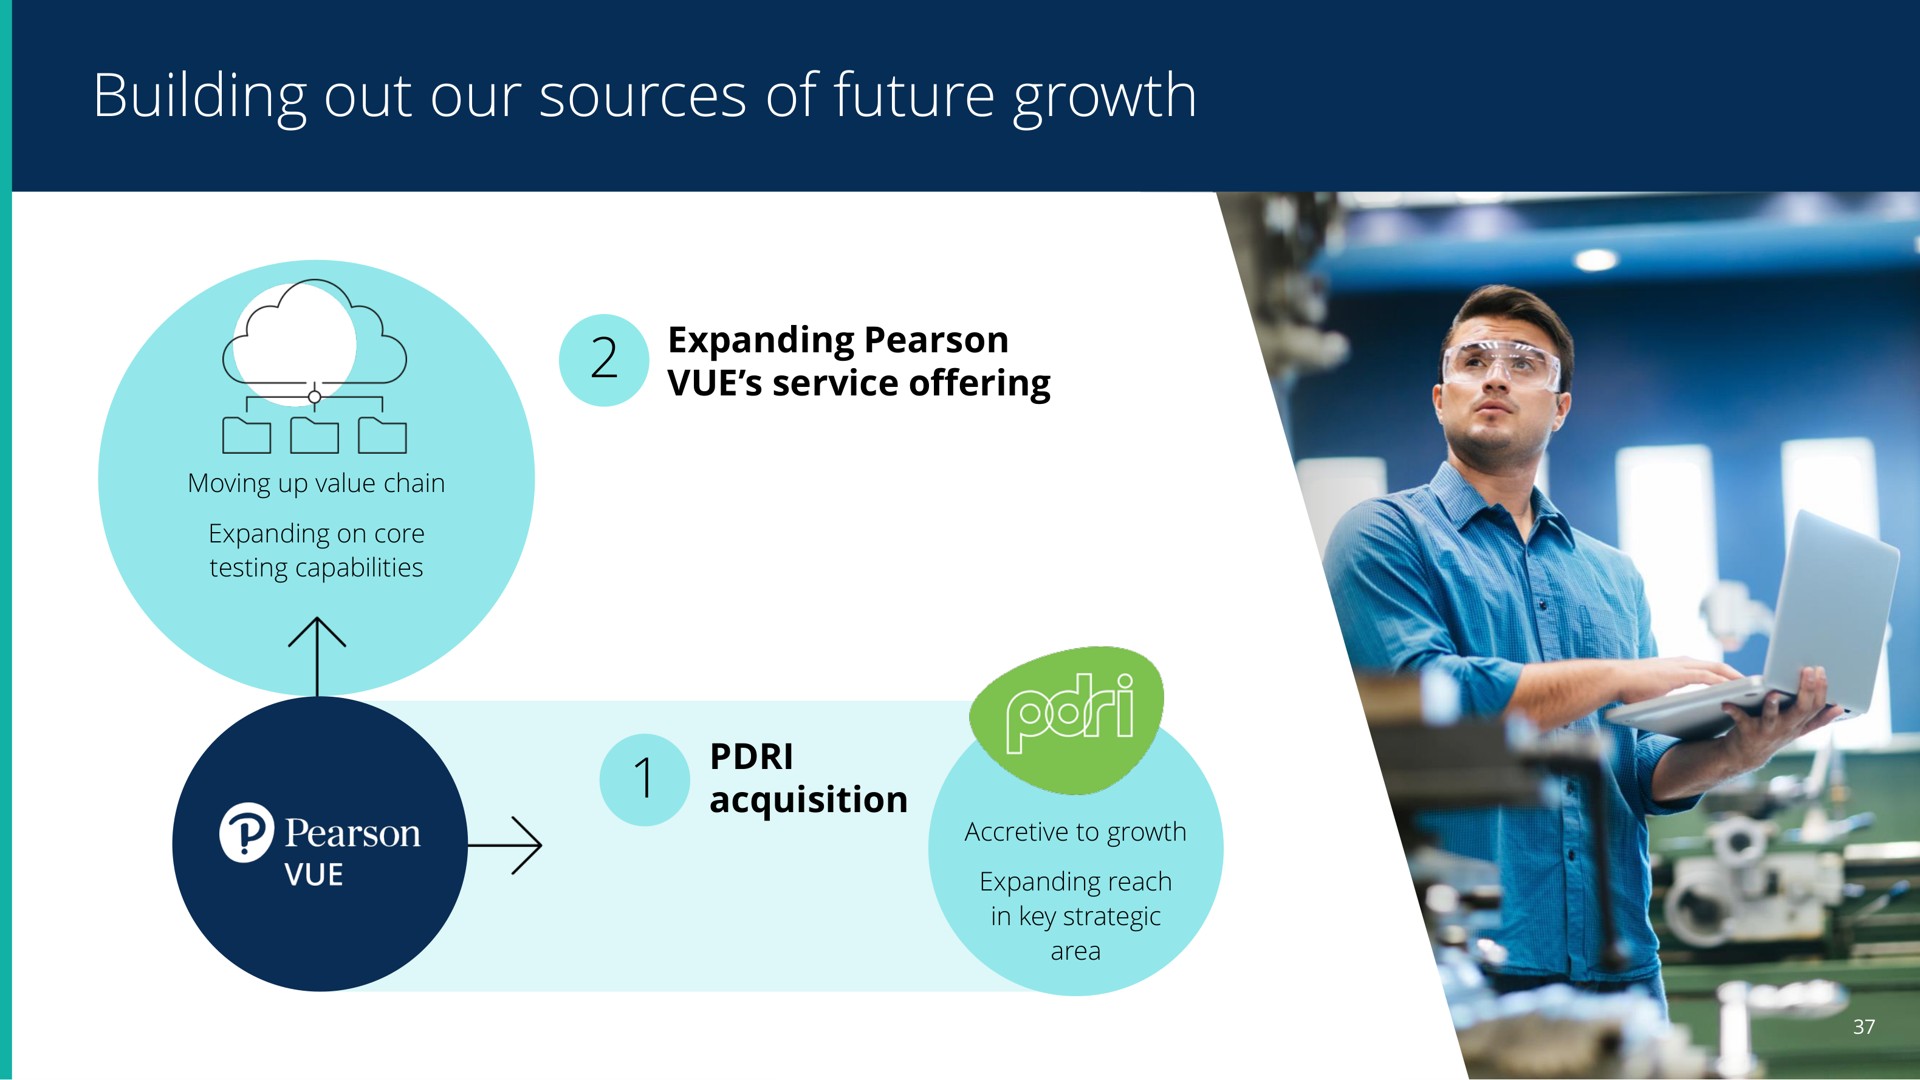 building out our sources of future growth | Pearson